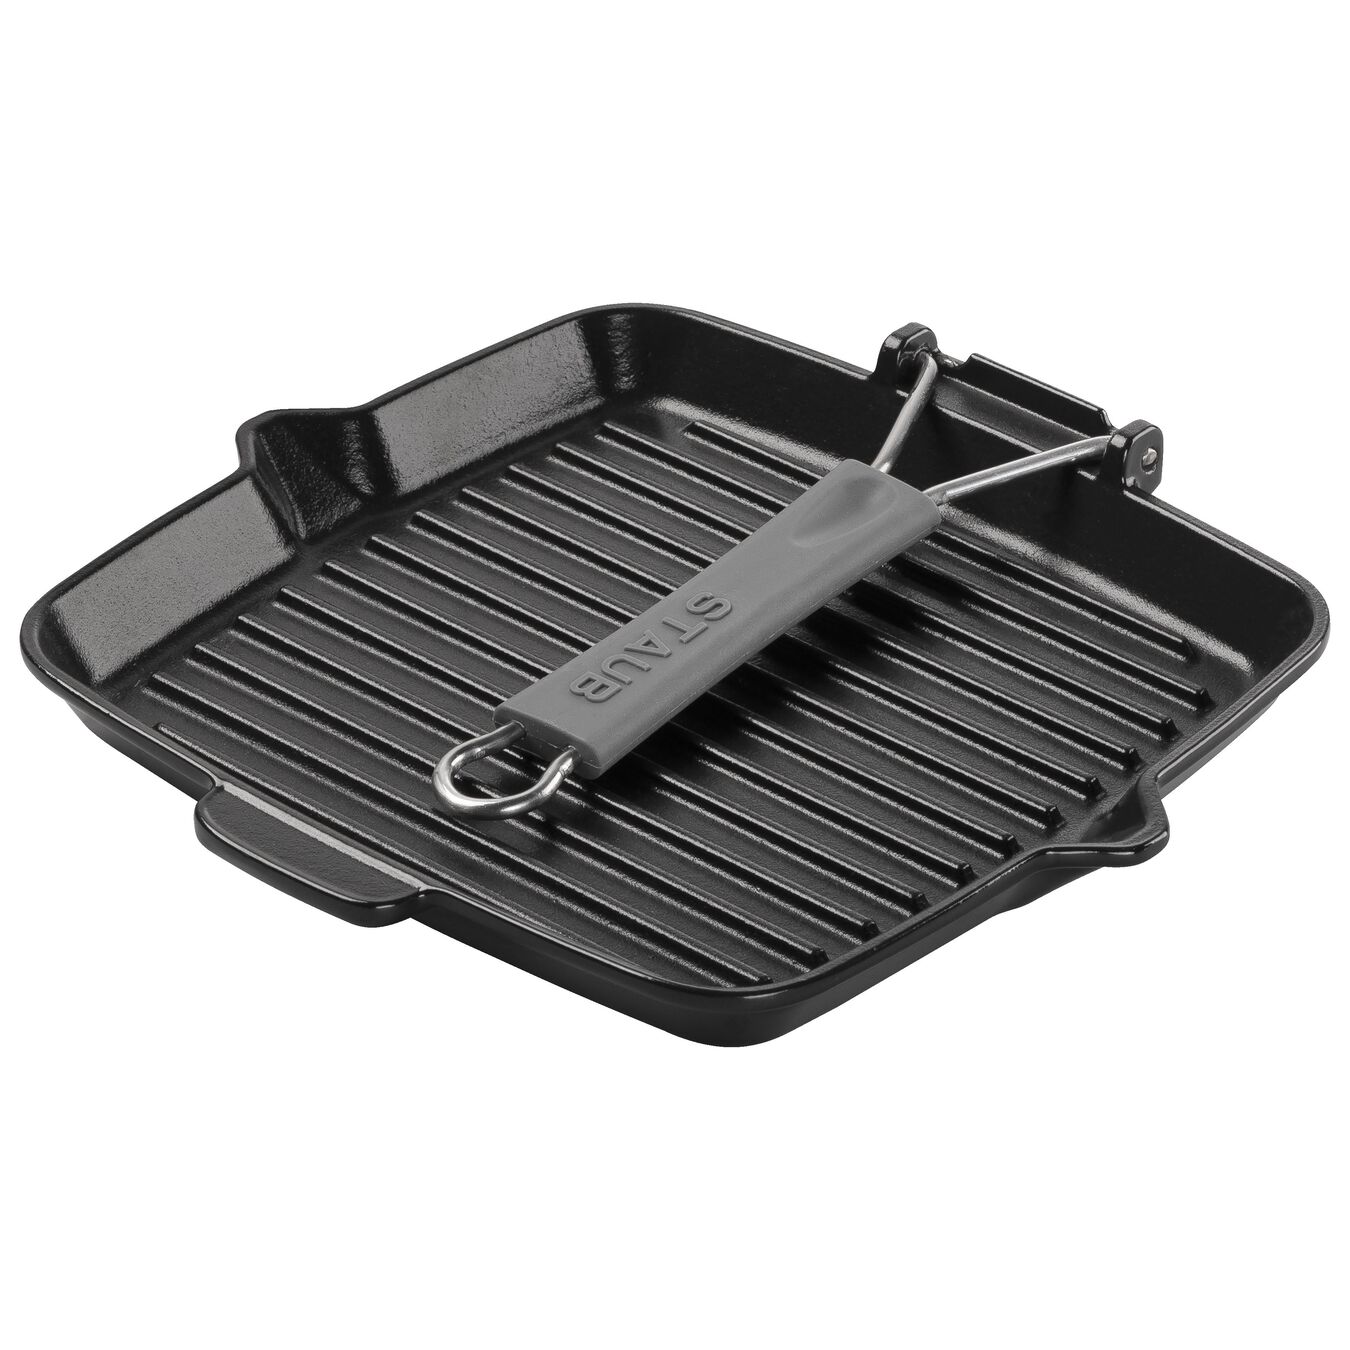 24 x 24 cm square Cast iron Grill pan with pouring spout black,,large 2